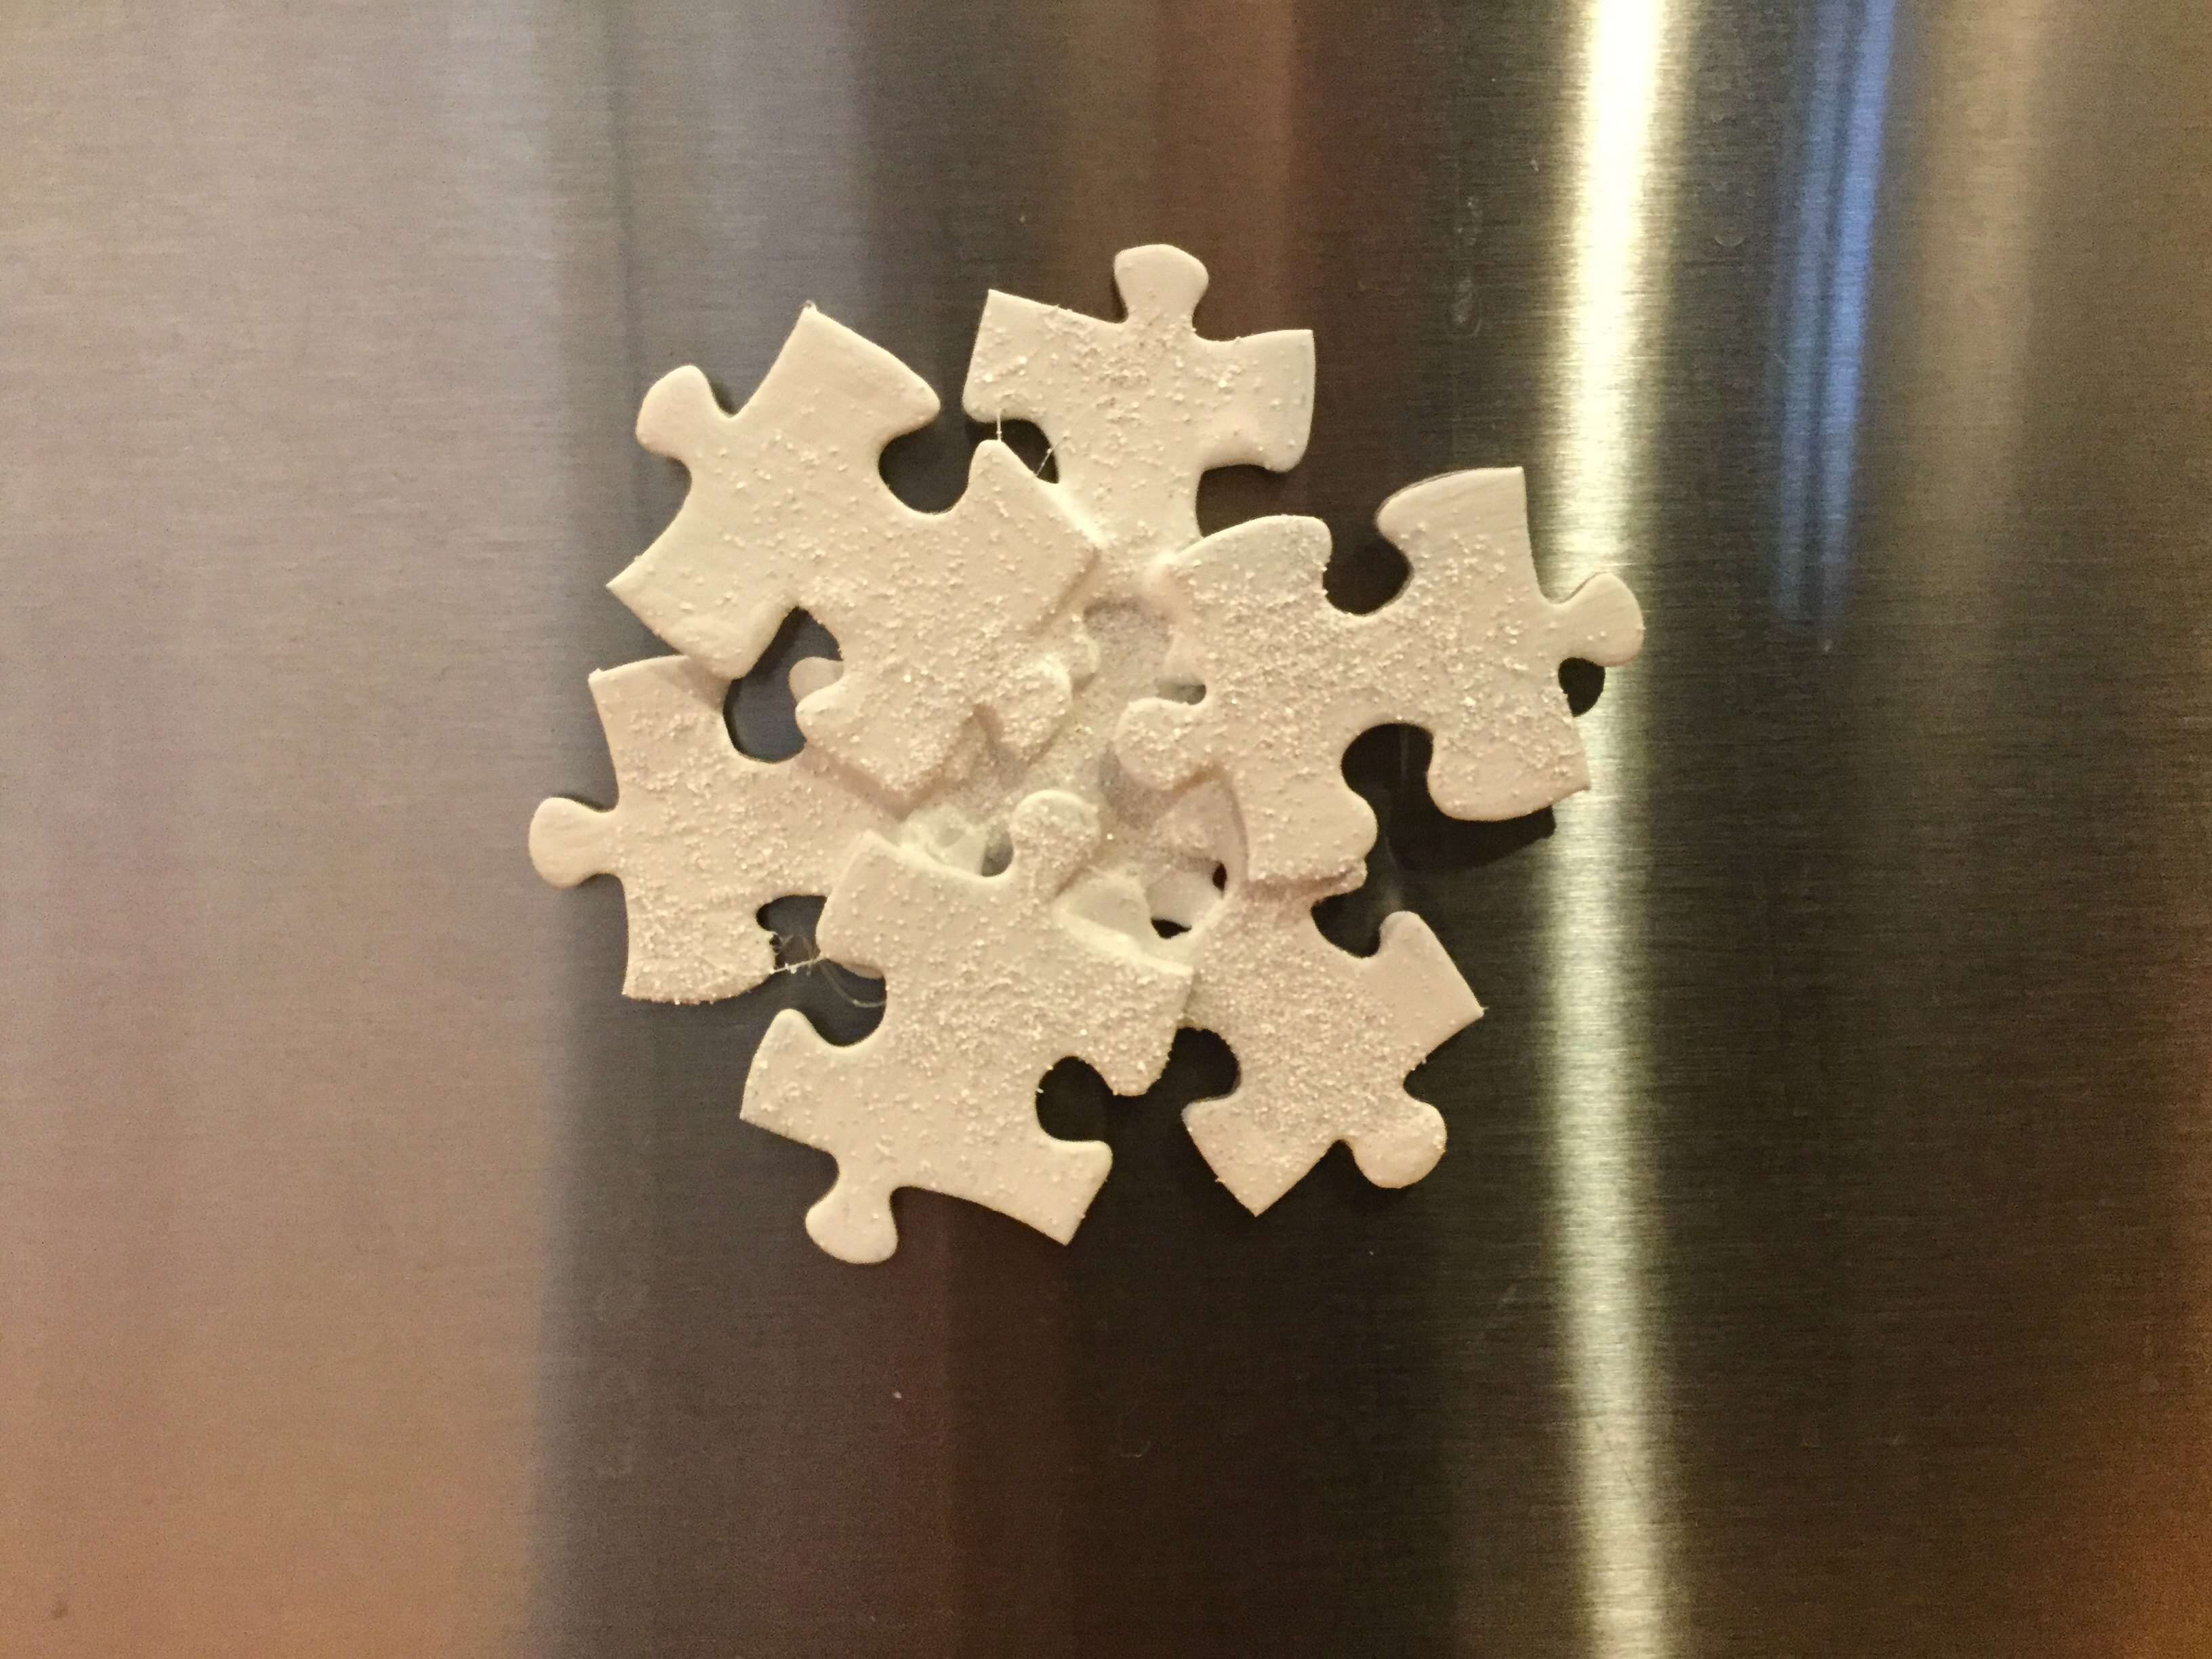 Beautiful Snowflake From Puzzle Pieces